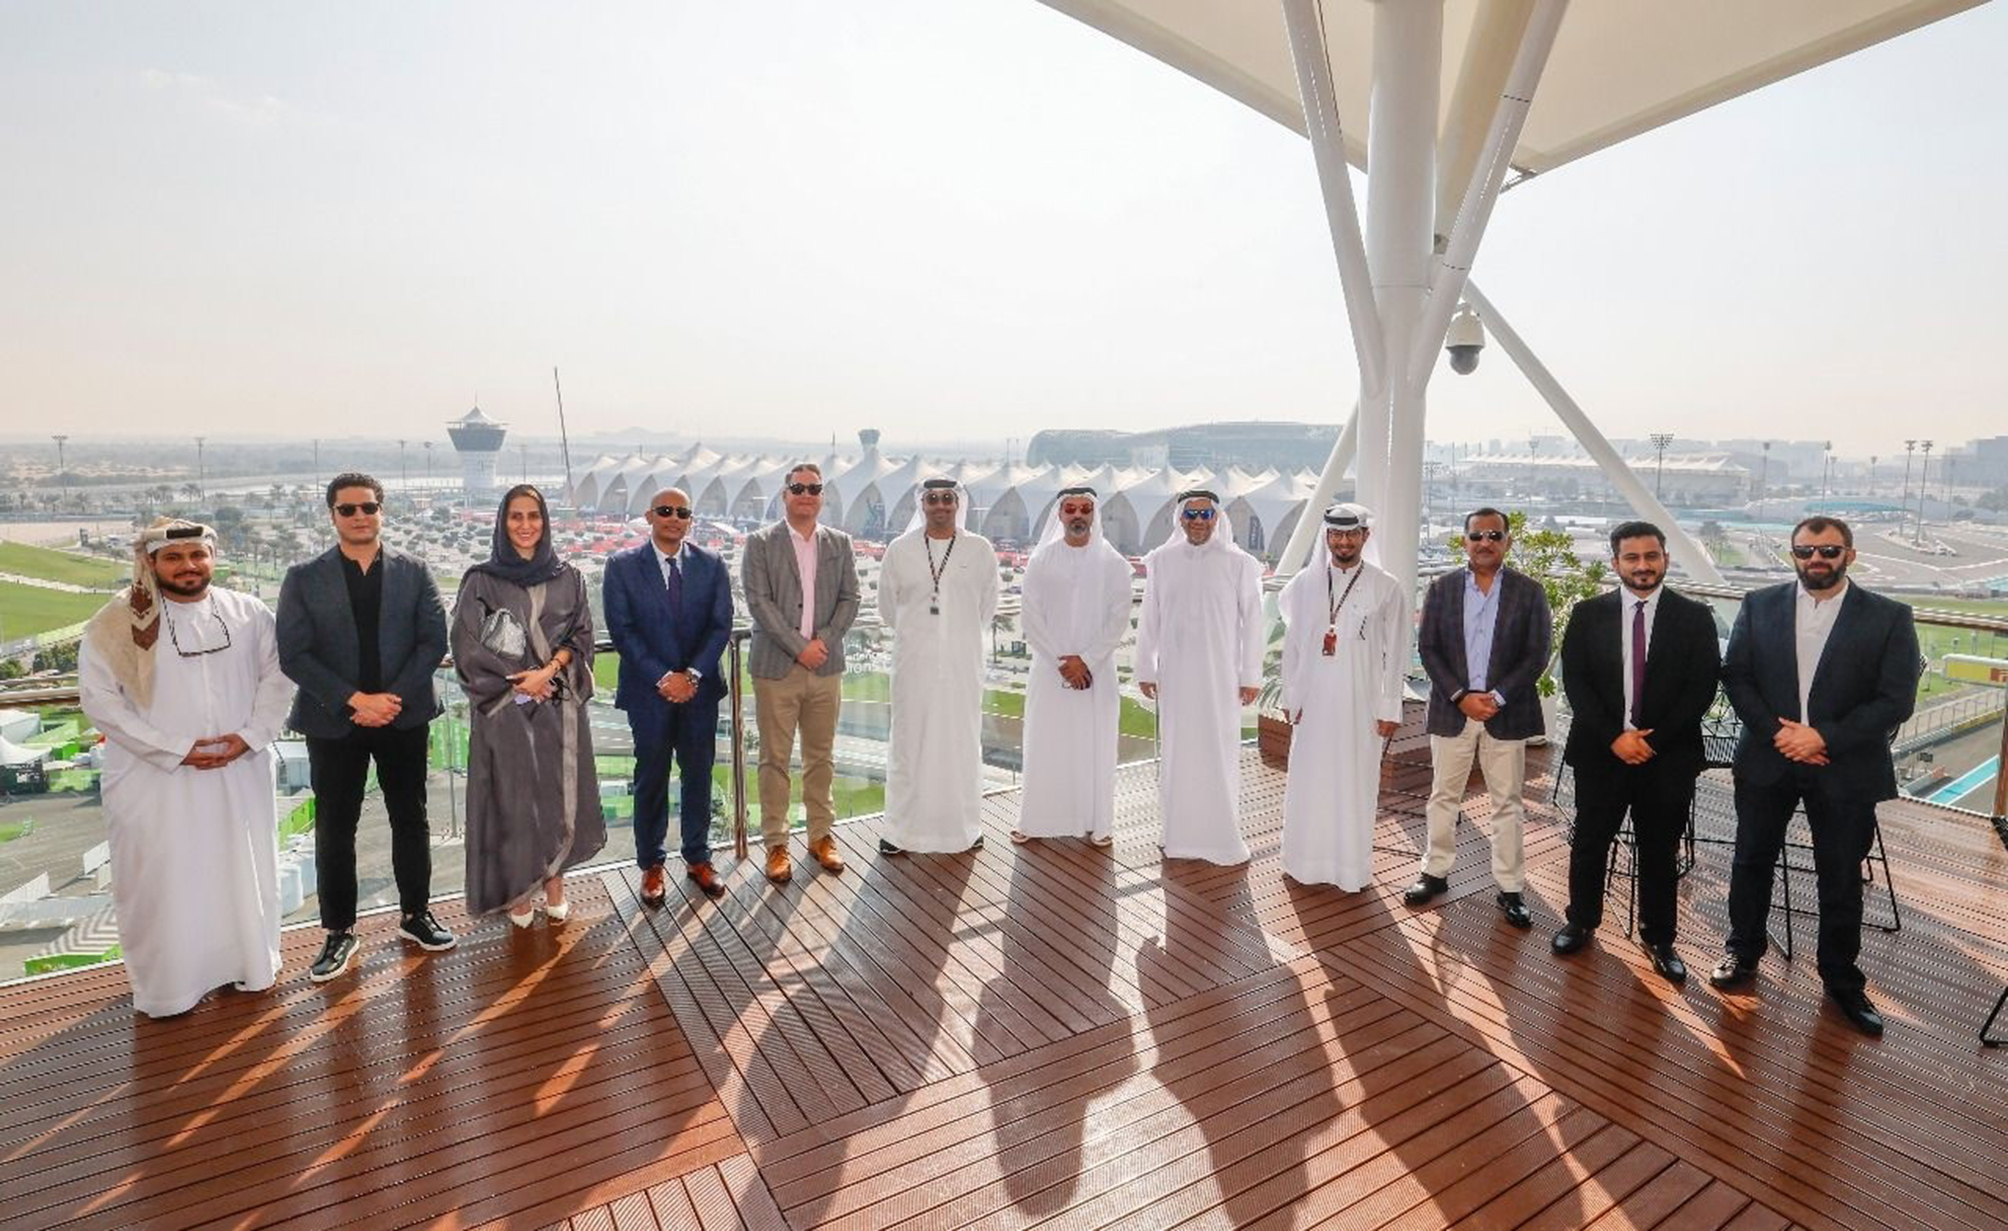 ADMM Announces Long-Term Partnership With The Gargash Group Ahead Of #ABUDHABIDGP Finale